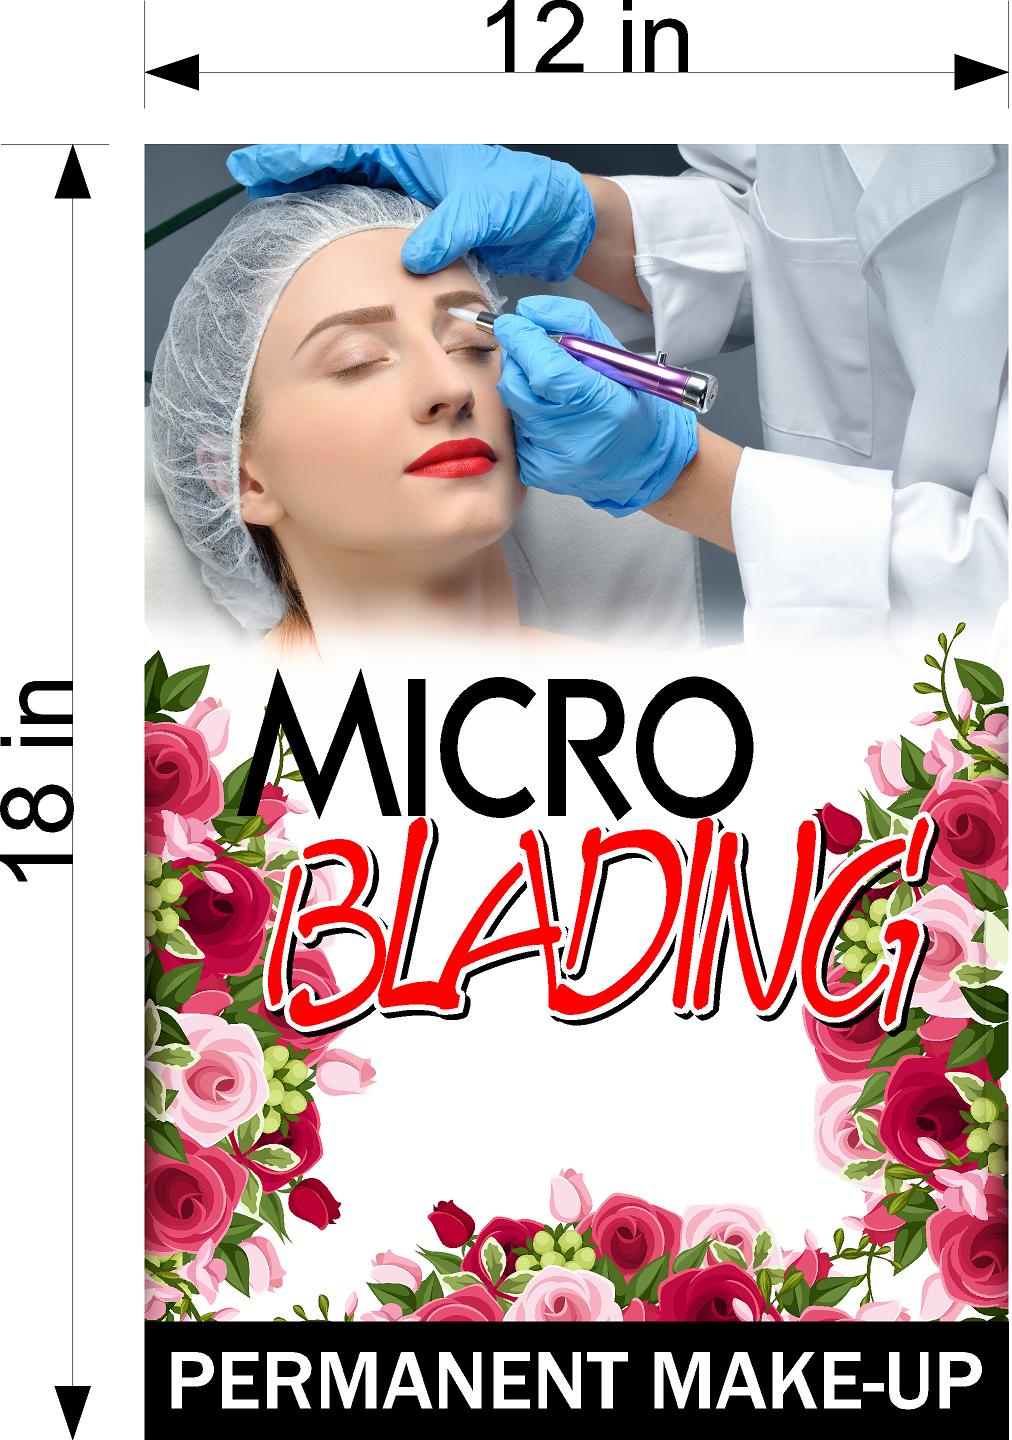 Microblading 12 Wallpaper Fabric Poster with Adhesive Backing Wall Interior Services Permanent Makeup Tattoo Vertical